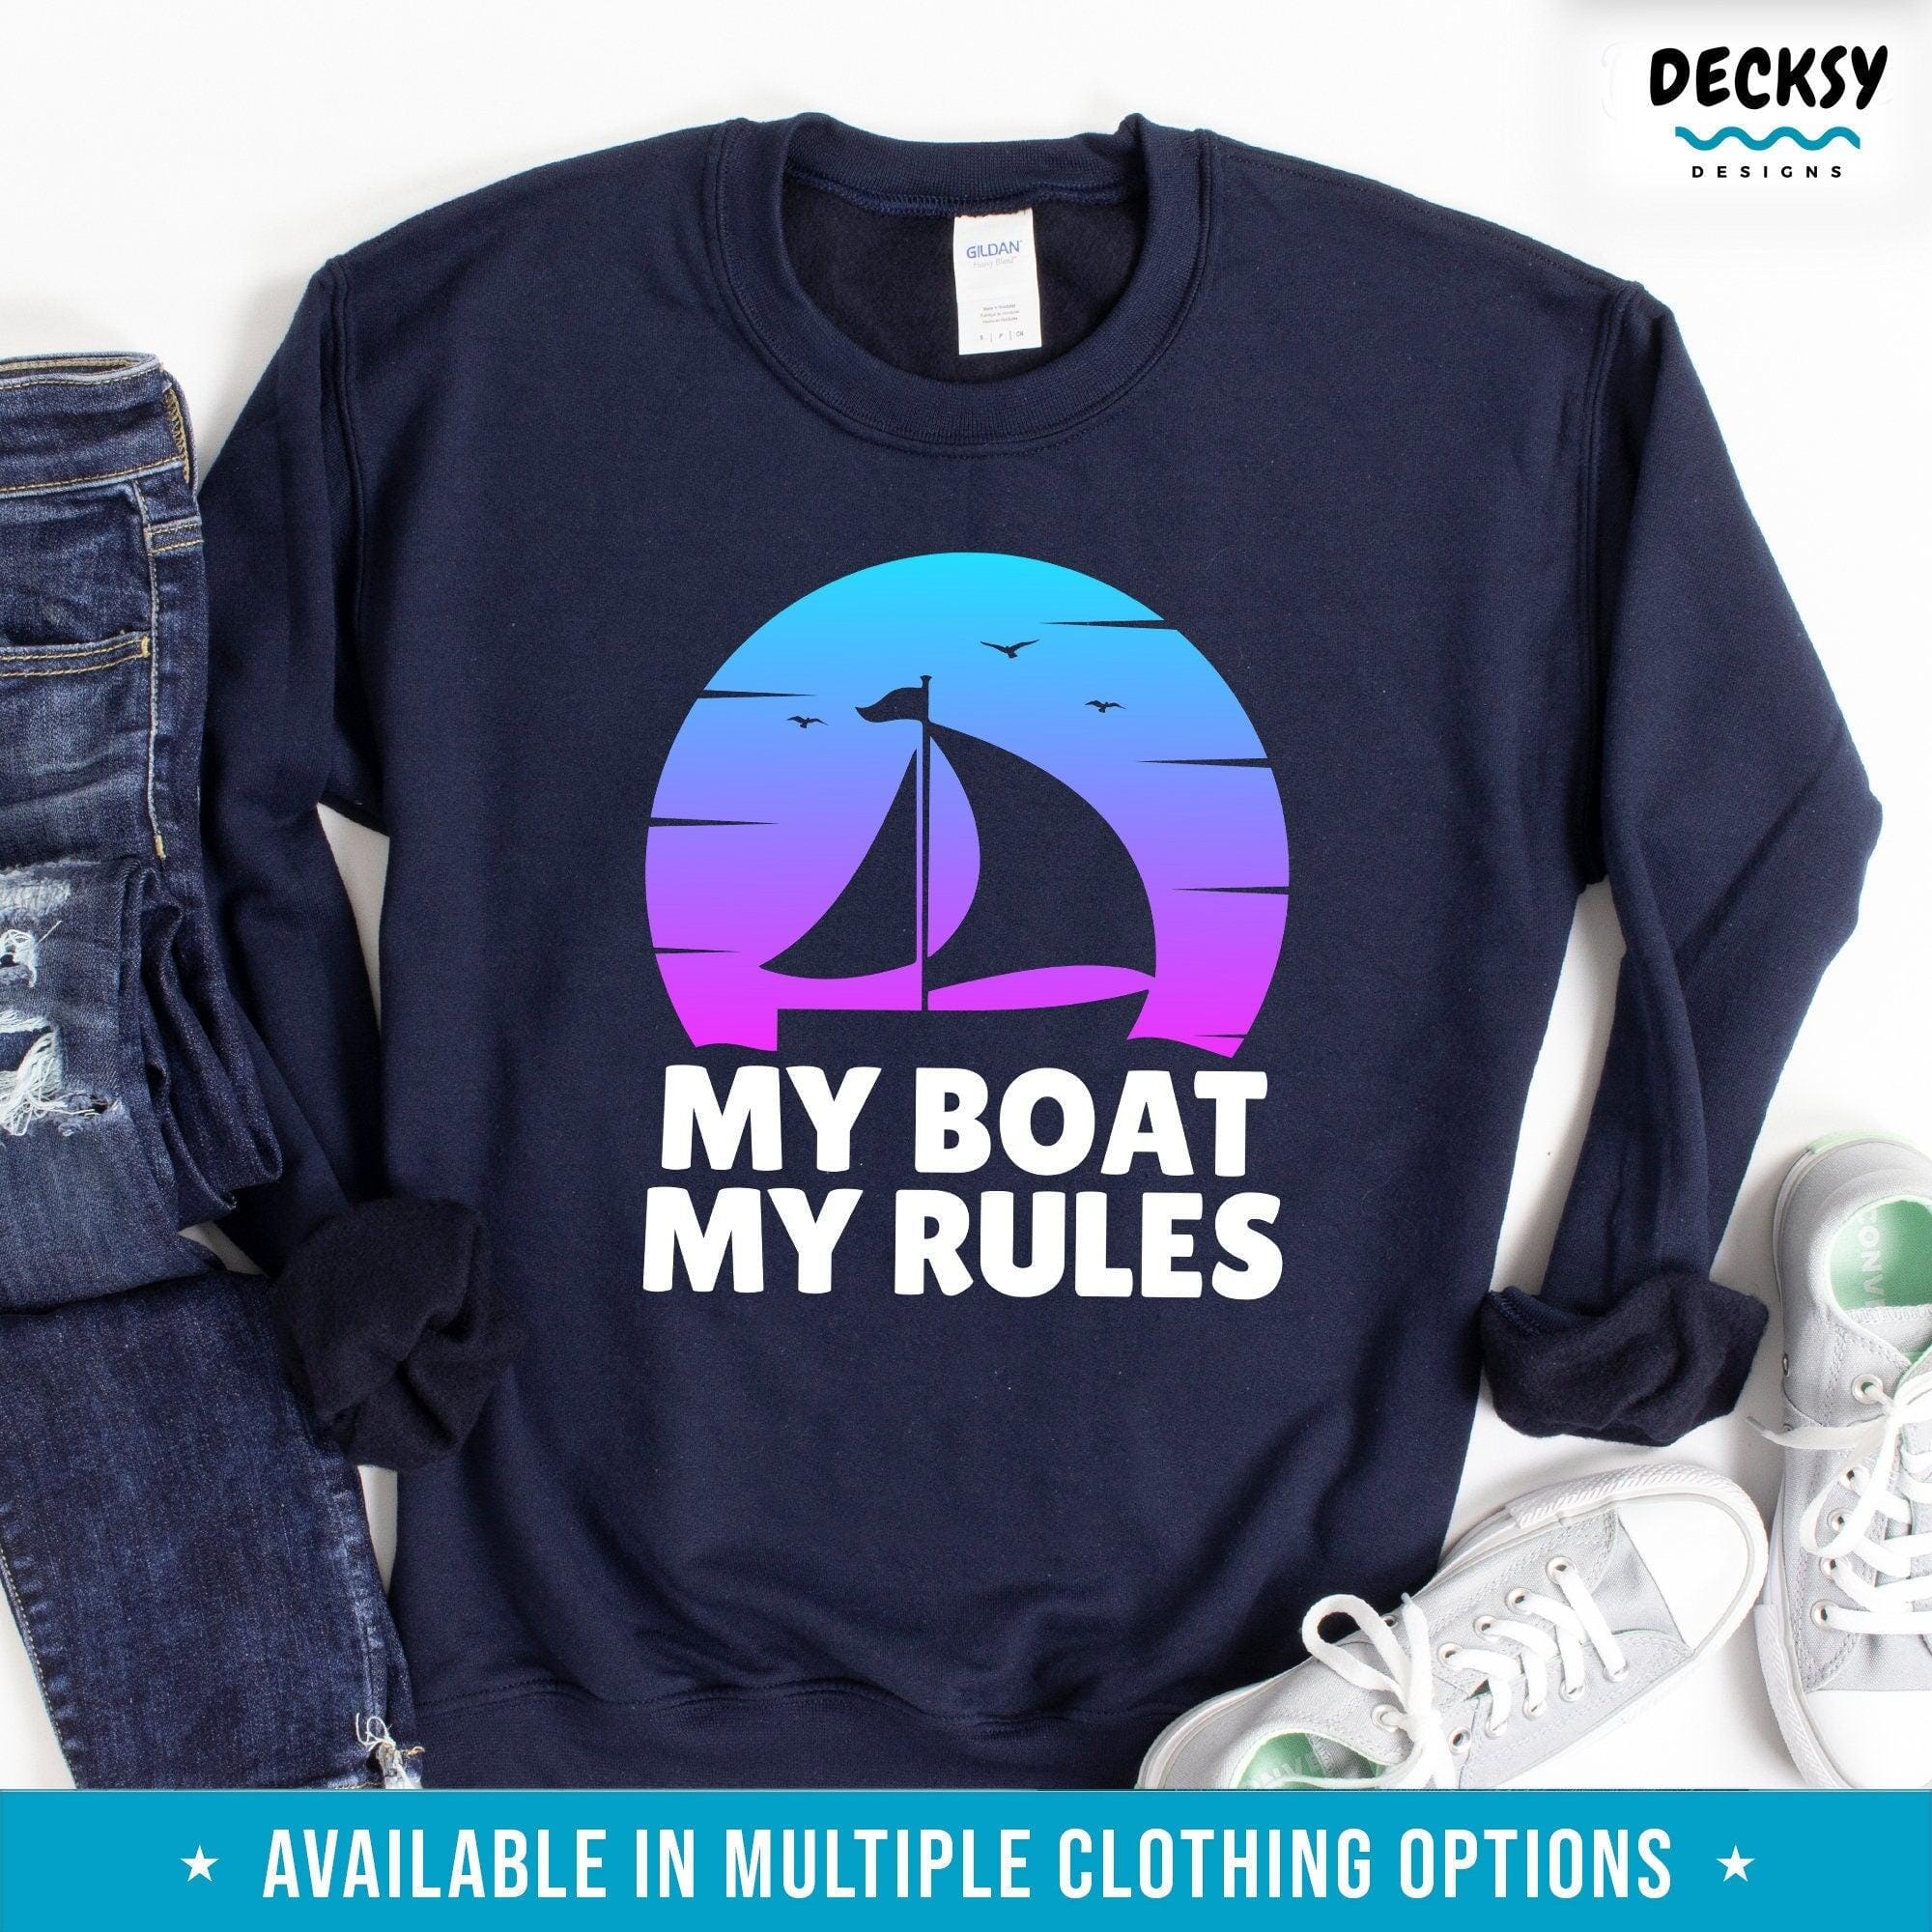 Boat Owner Shirt, Gift For Boat Lover-Clothing:Gender-Neutral Adult Clothing:Tops & Tees:T-shirts:Graphic Tees-DecksyDesigns